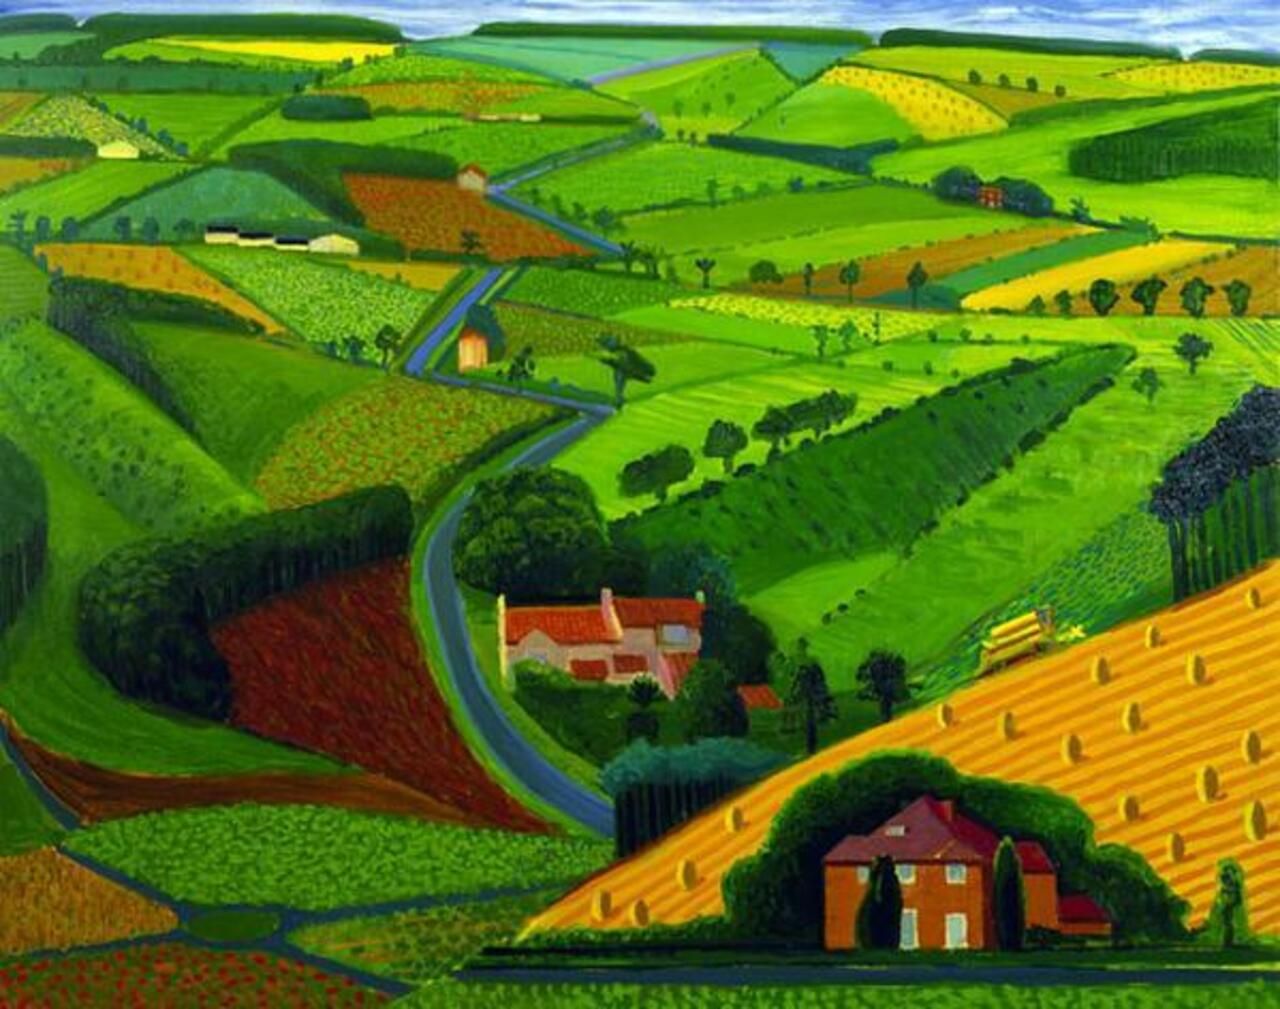 RT @panoround01: DAVID #HOCKNEY "The Road Across the Wolds" (1997)  #art #green #nature #iloveart #painting  #spring #colores #colors http://t.co/y7FDKjLpYp